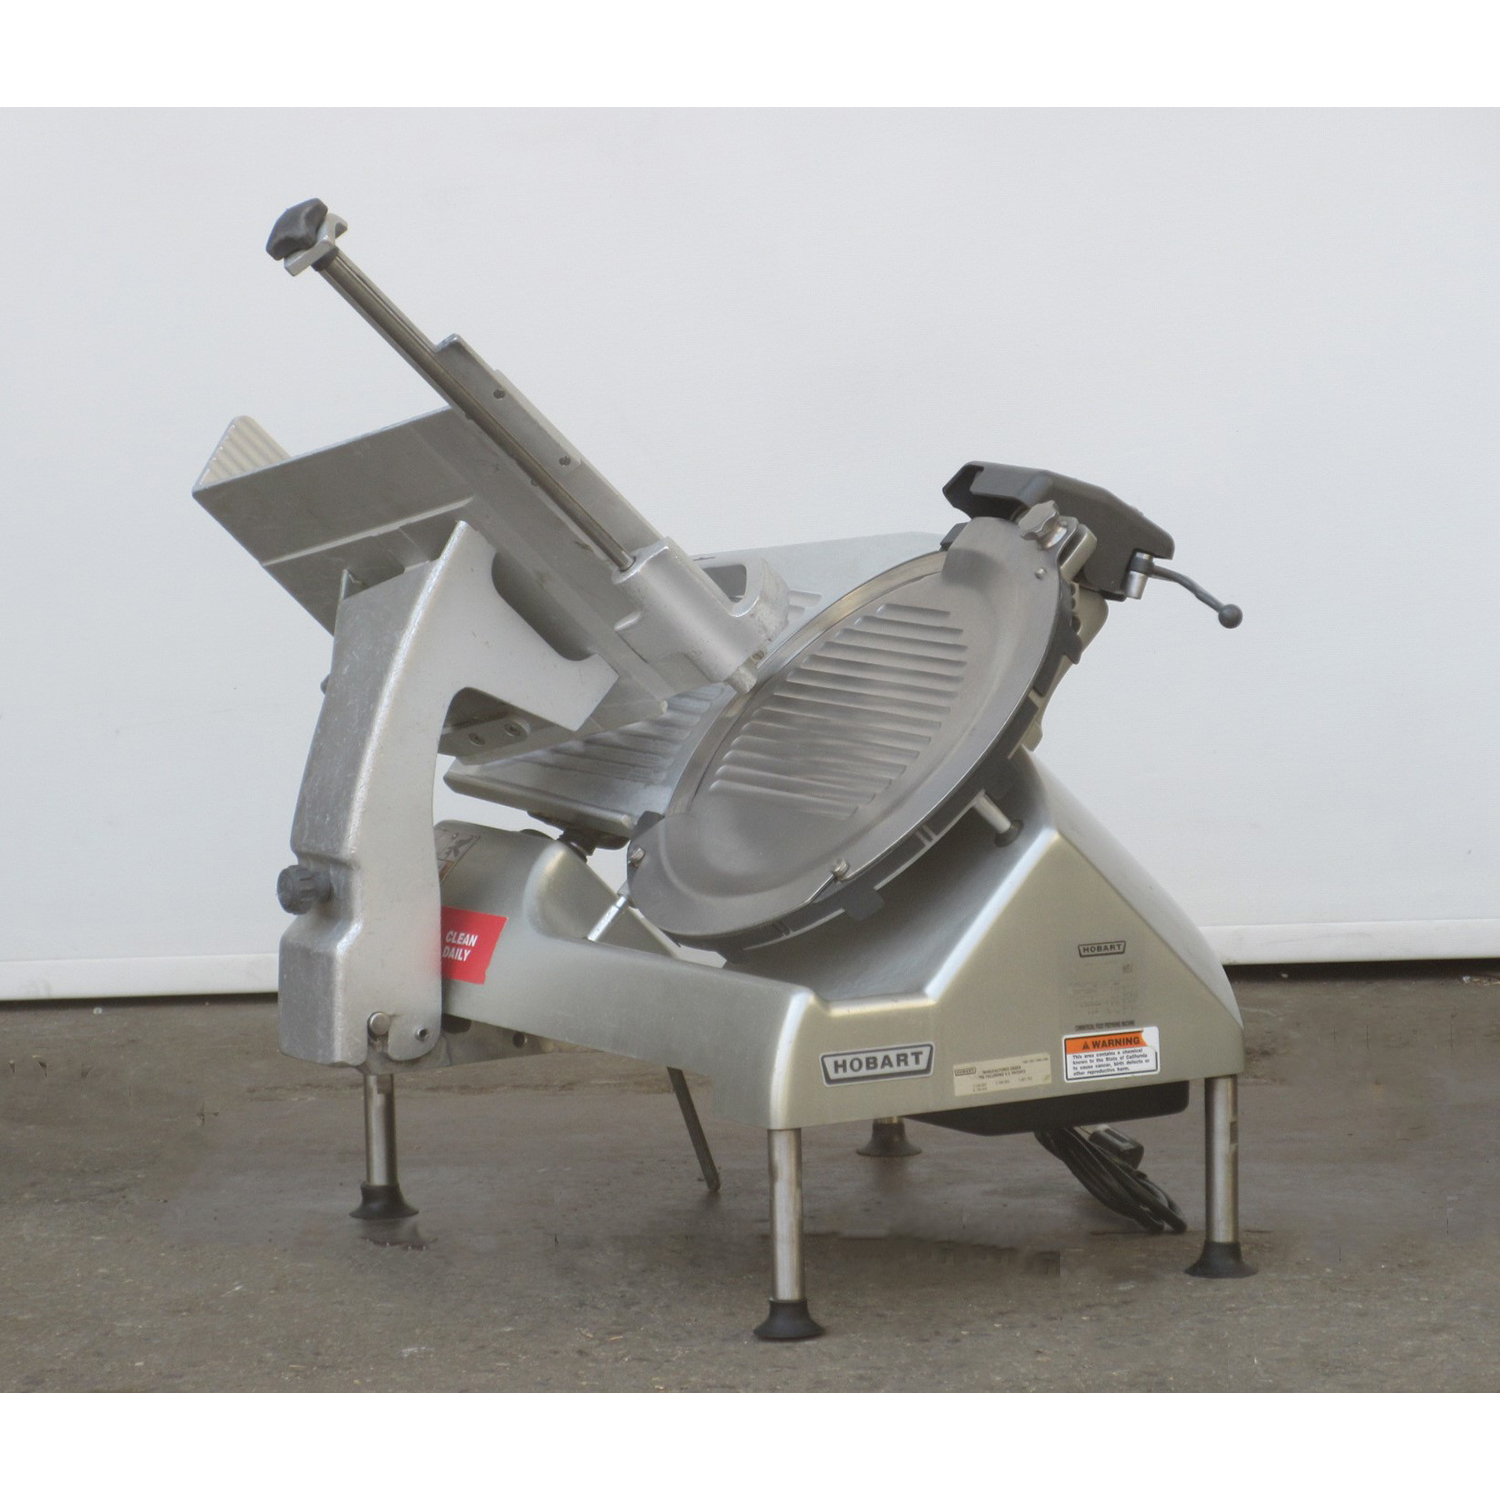 Hobart HS8 Heavy Duty Meat/Deli Slicer, Used Excellent Condition